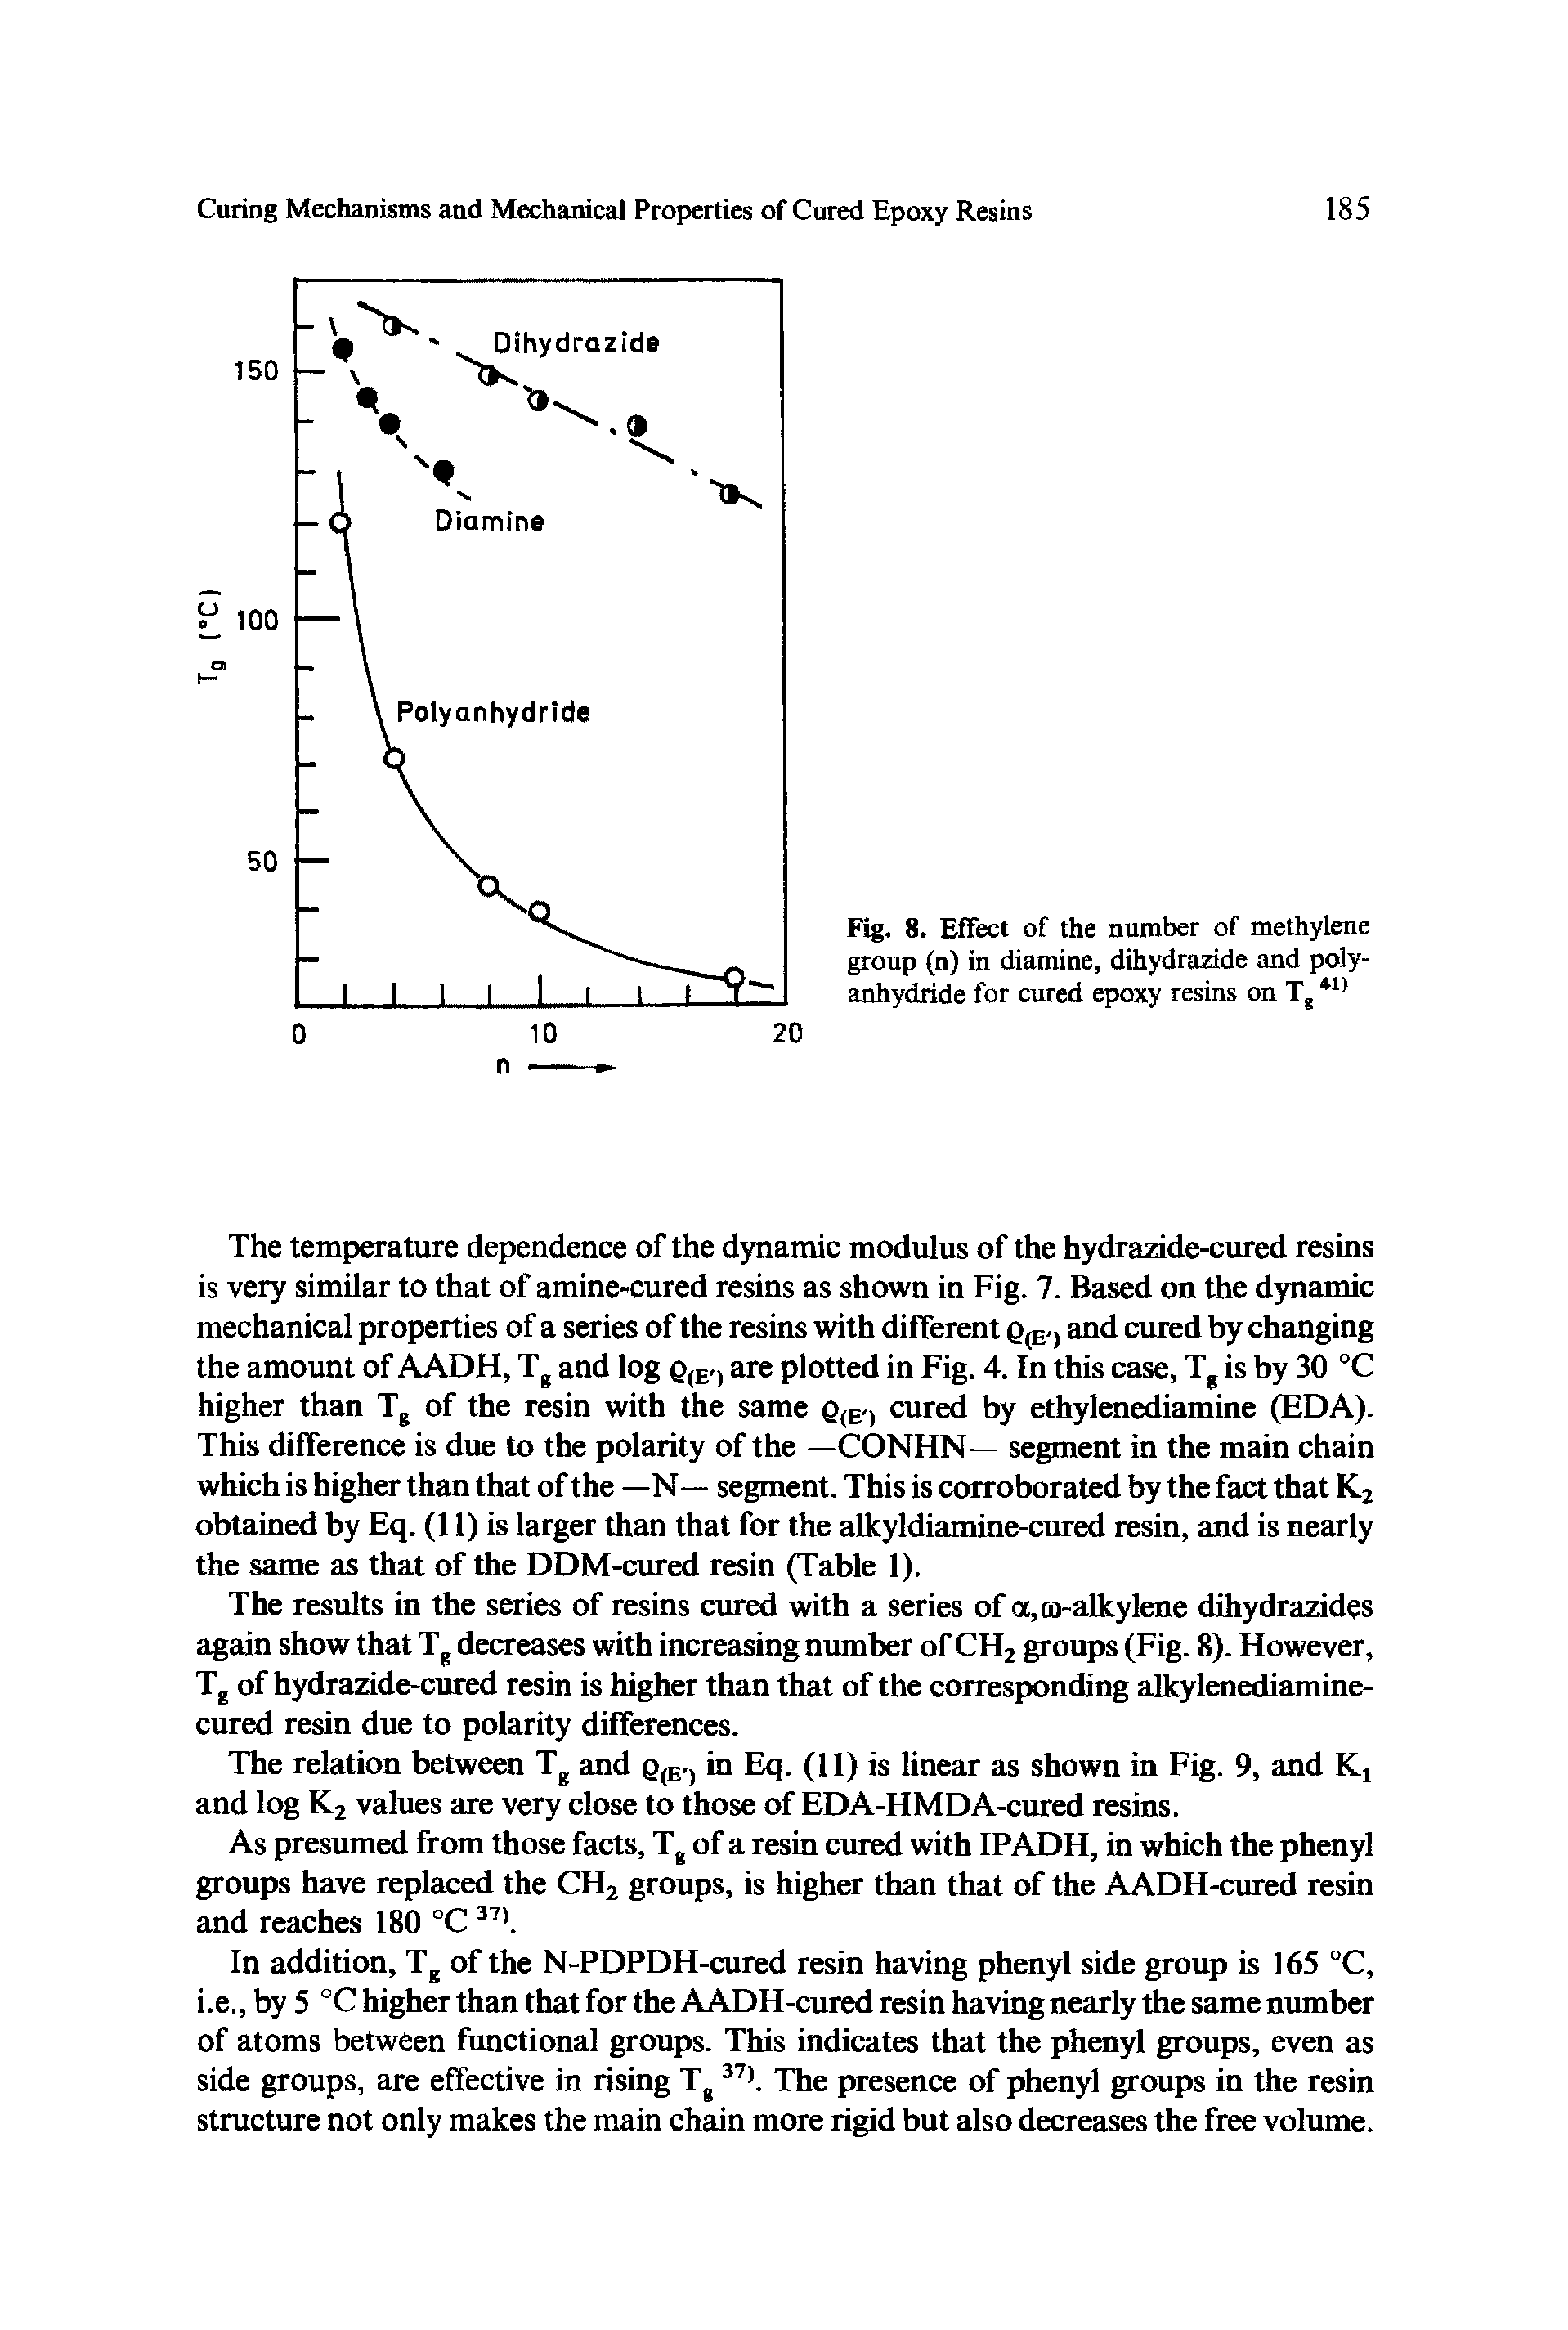 Fig. 8. Effect of the number of methylene group (n) in diamine, dihydrazide and poly-anhydride for cured epoxy resins on Tg 41 ...